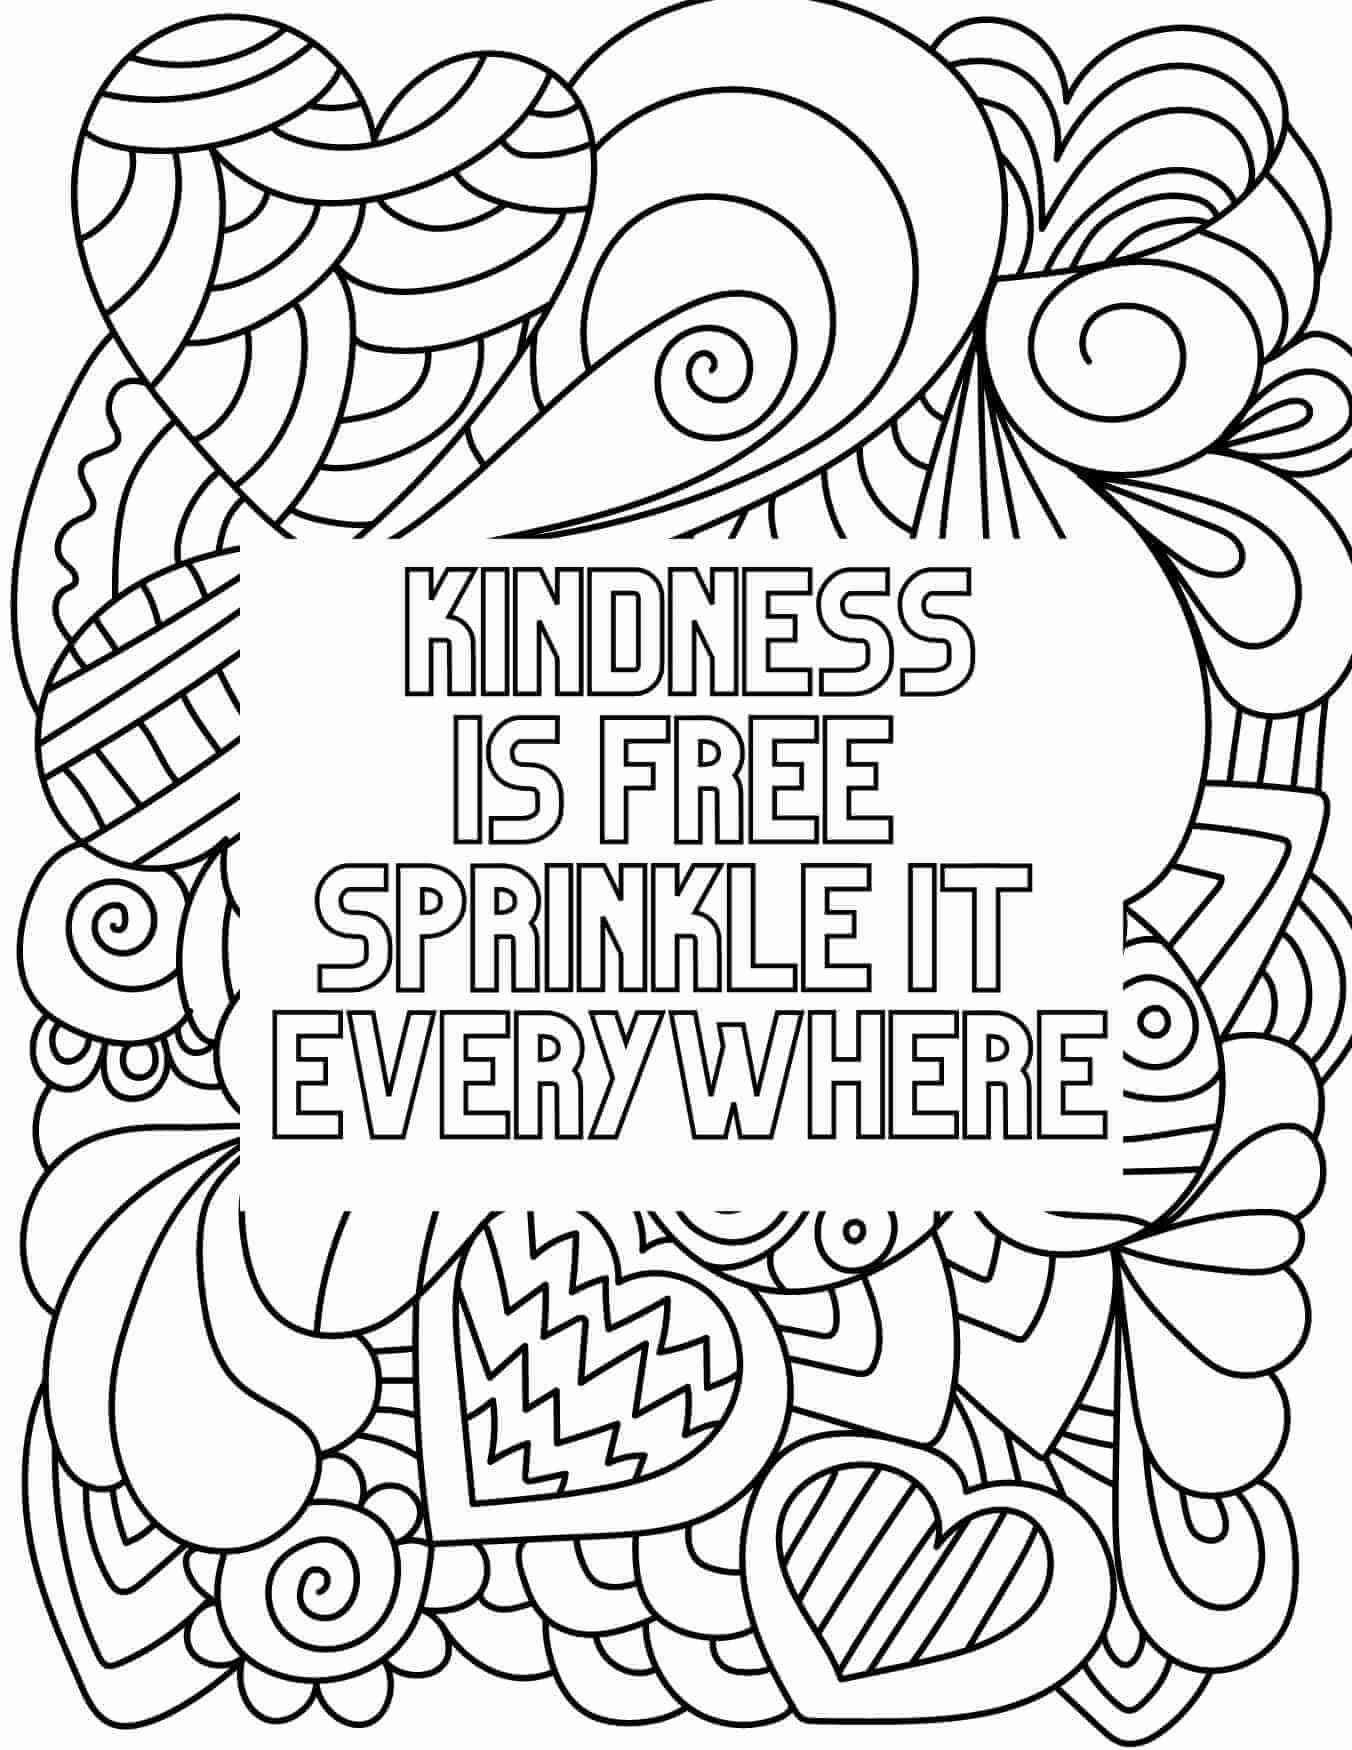 A coloring page with artistic designed hearts with open text overlay that reads "kindness is free sprinkle it everywhere."